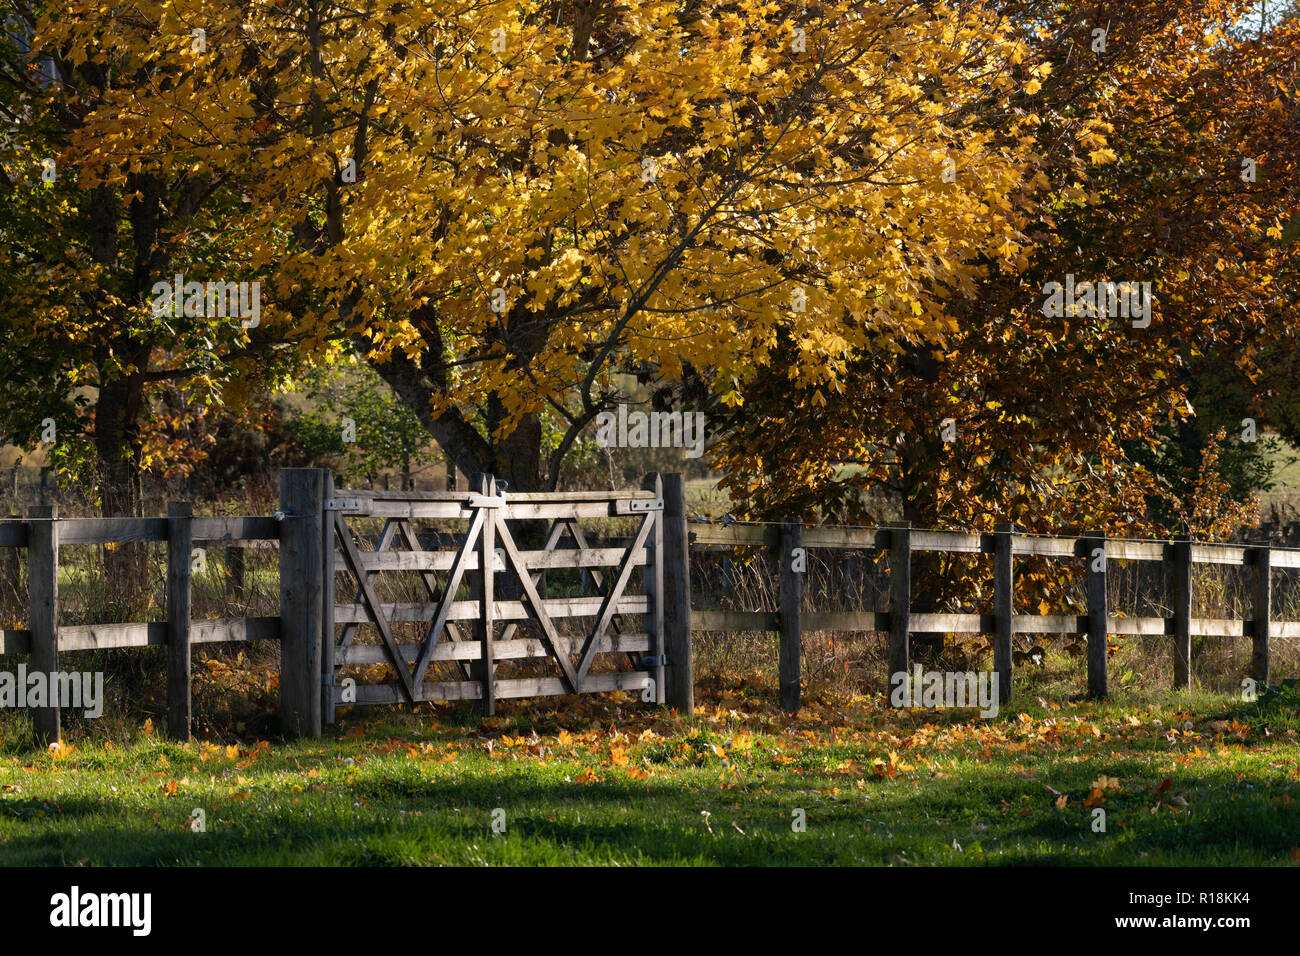 A Line of Trees Alongside a Wooden Post and Rail Fence in Autumn Stock Photo